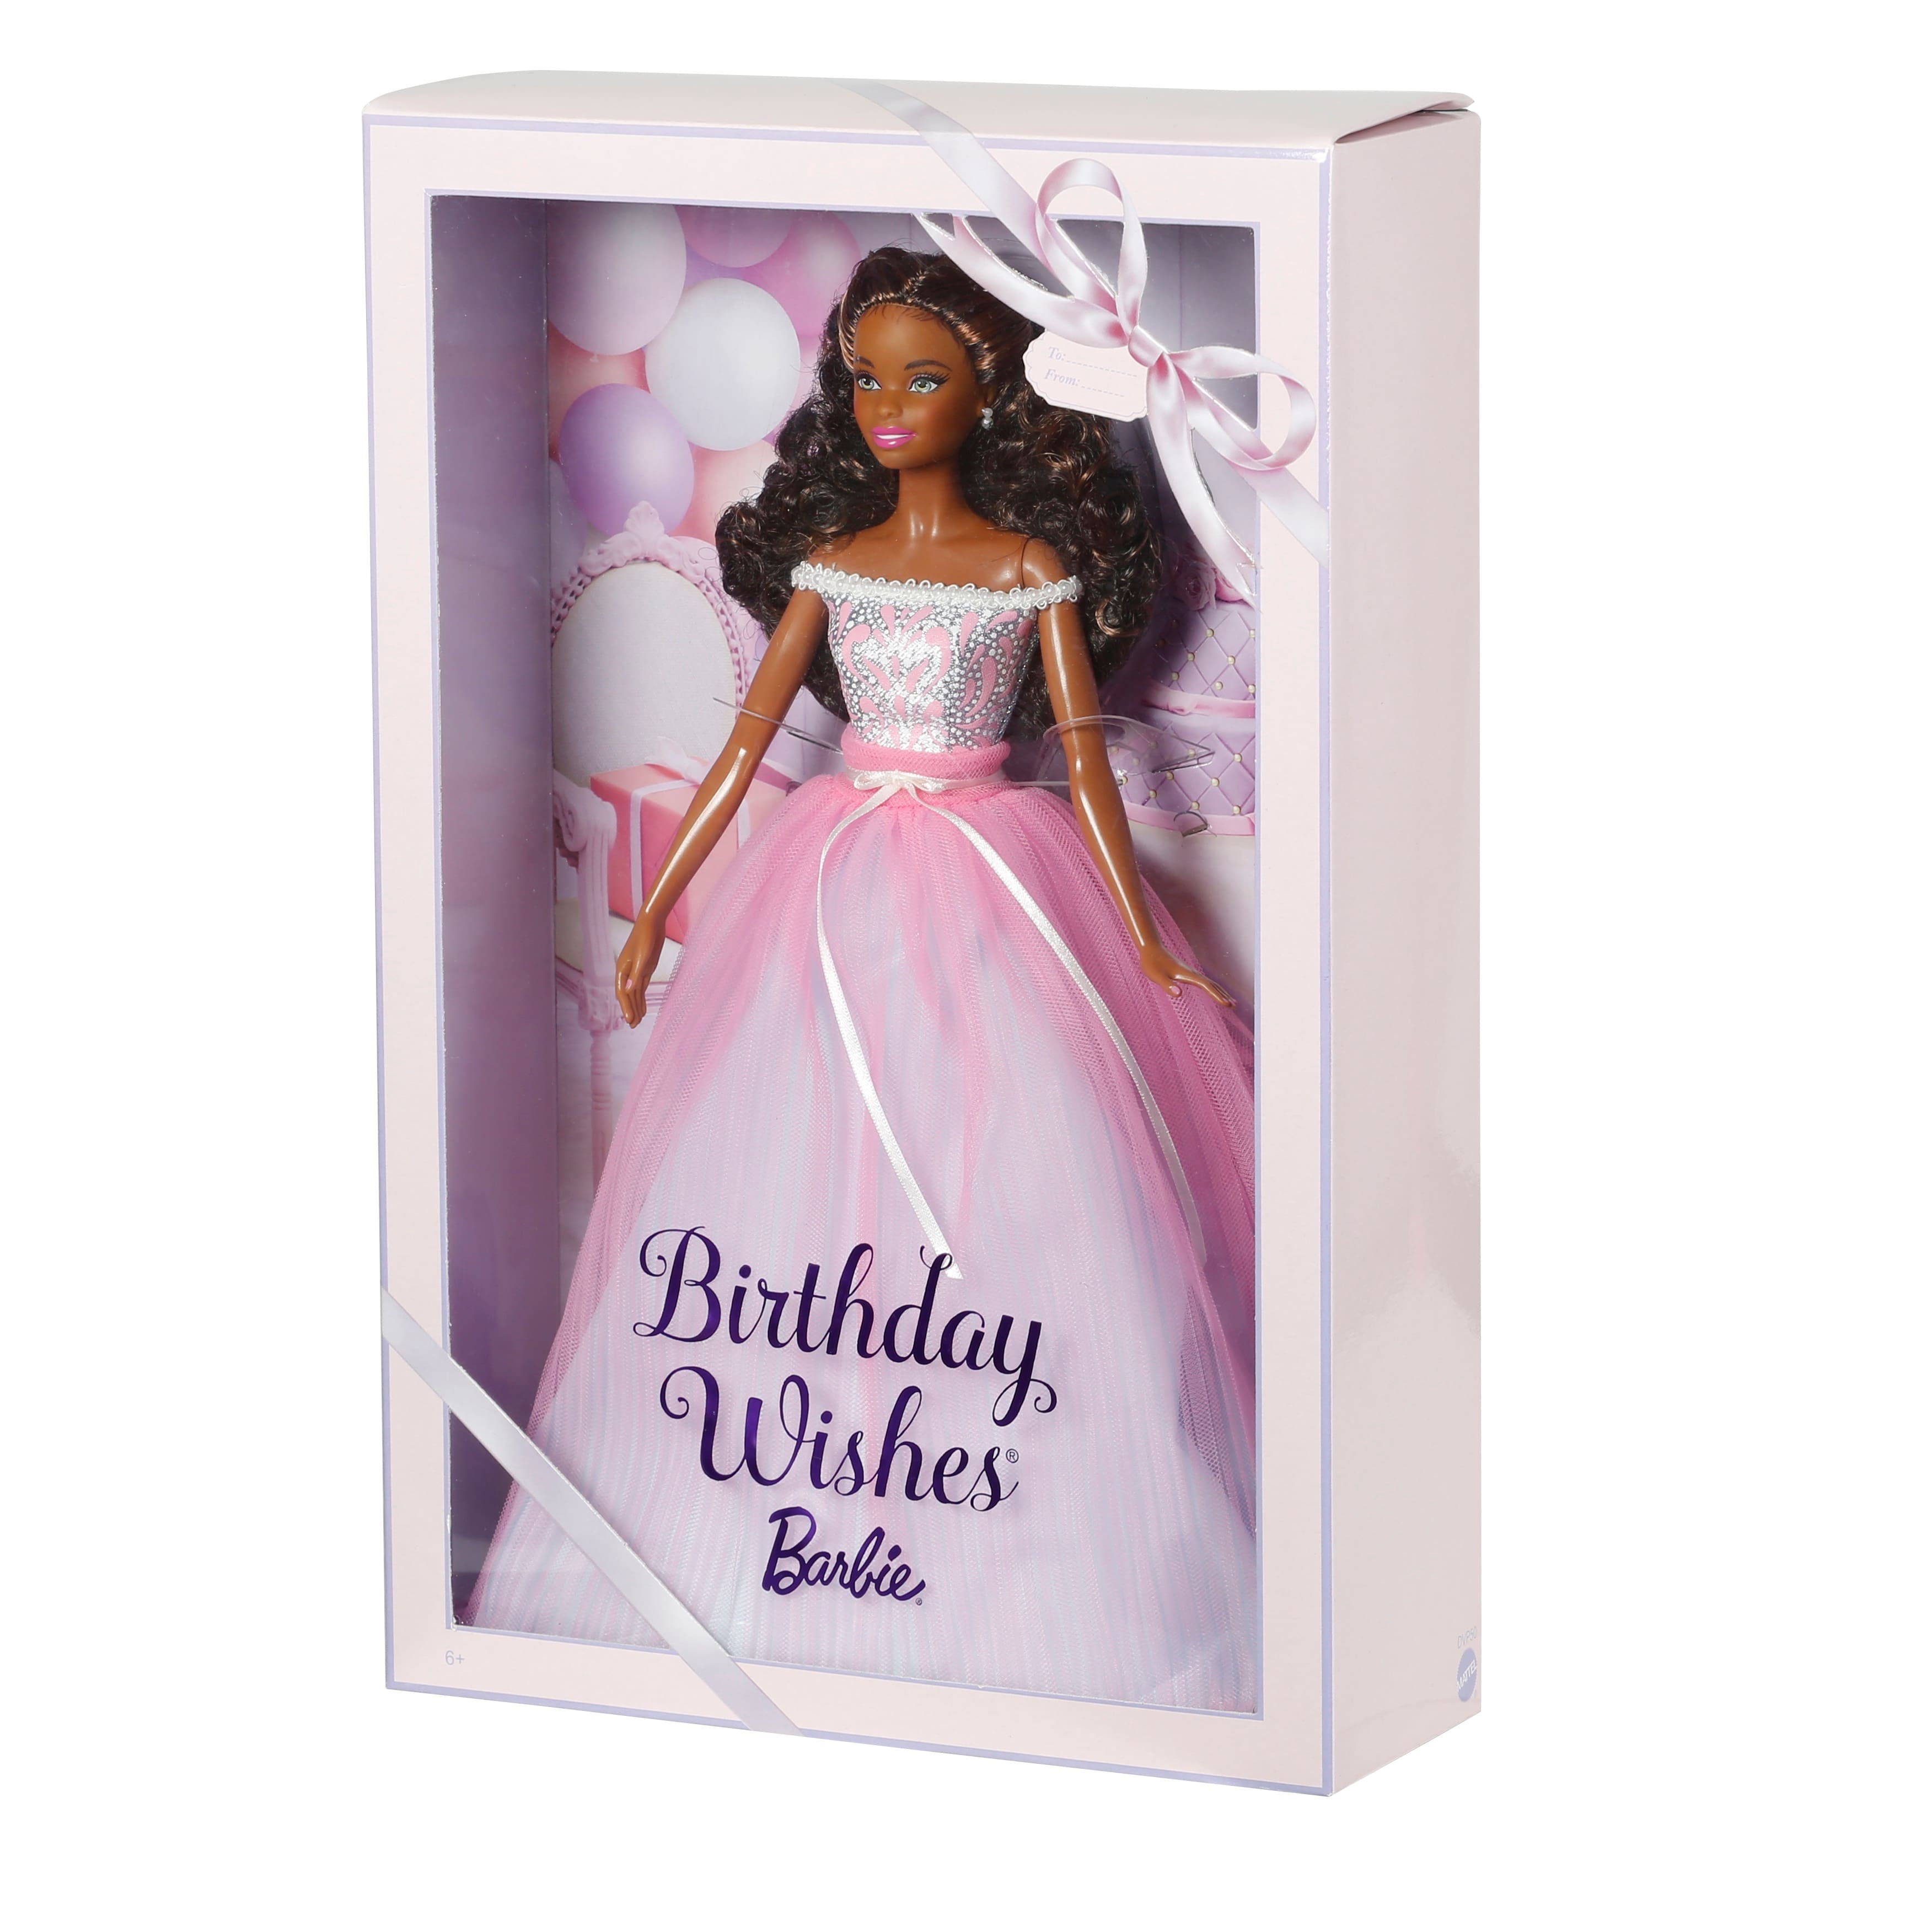 Shop For The Barbie Birthday Wishes Doll At Michaels